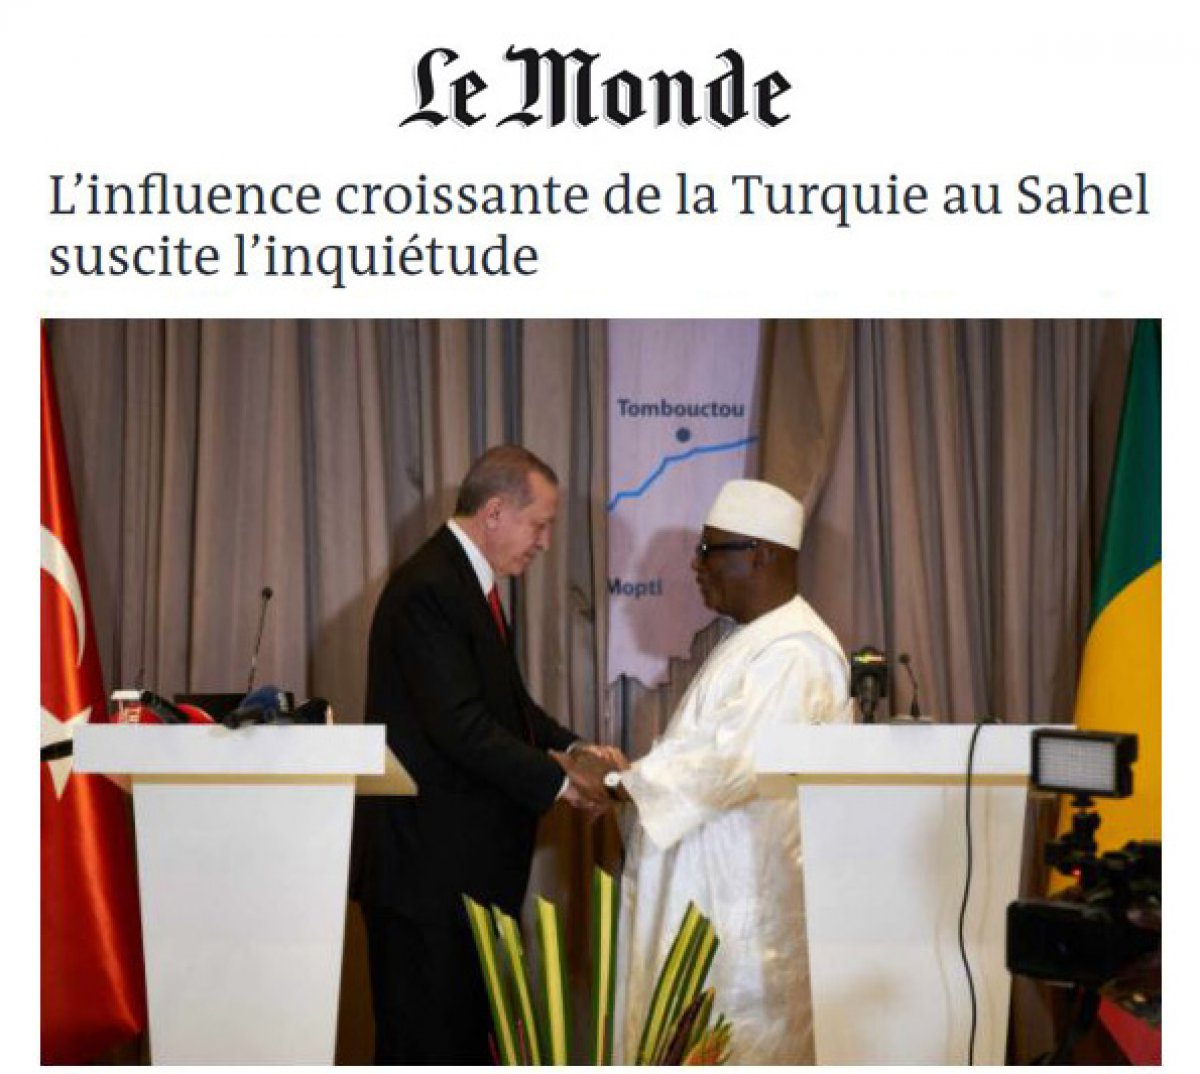 Le Monde: Turkey's growing influence in Africa is worrying #3